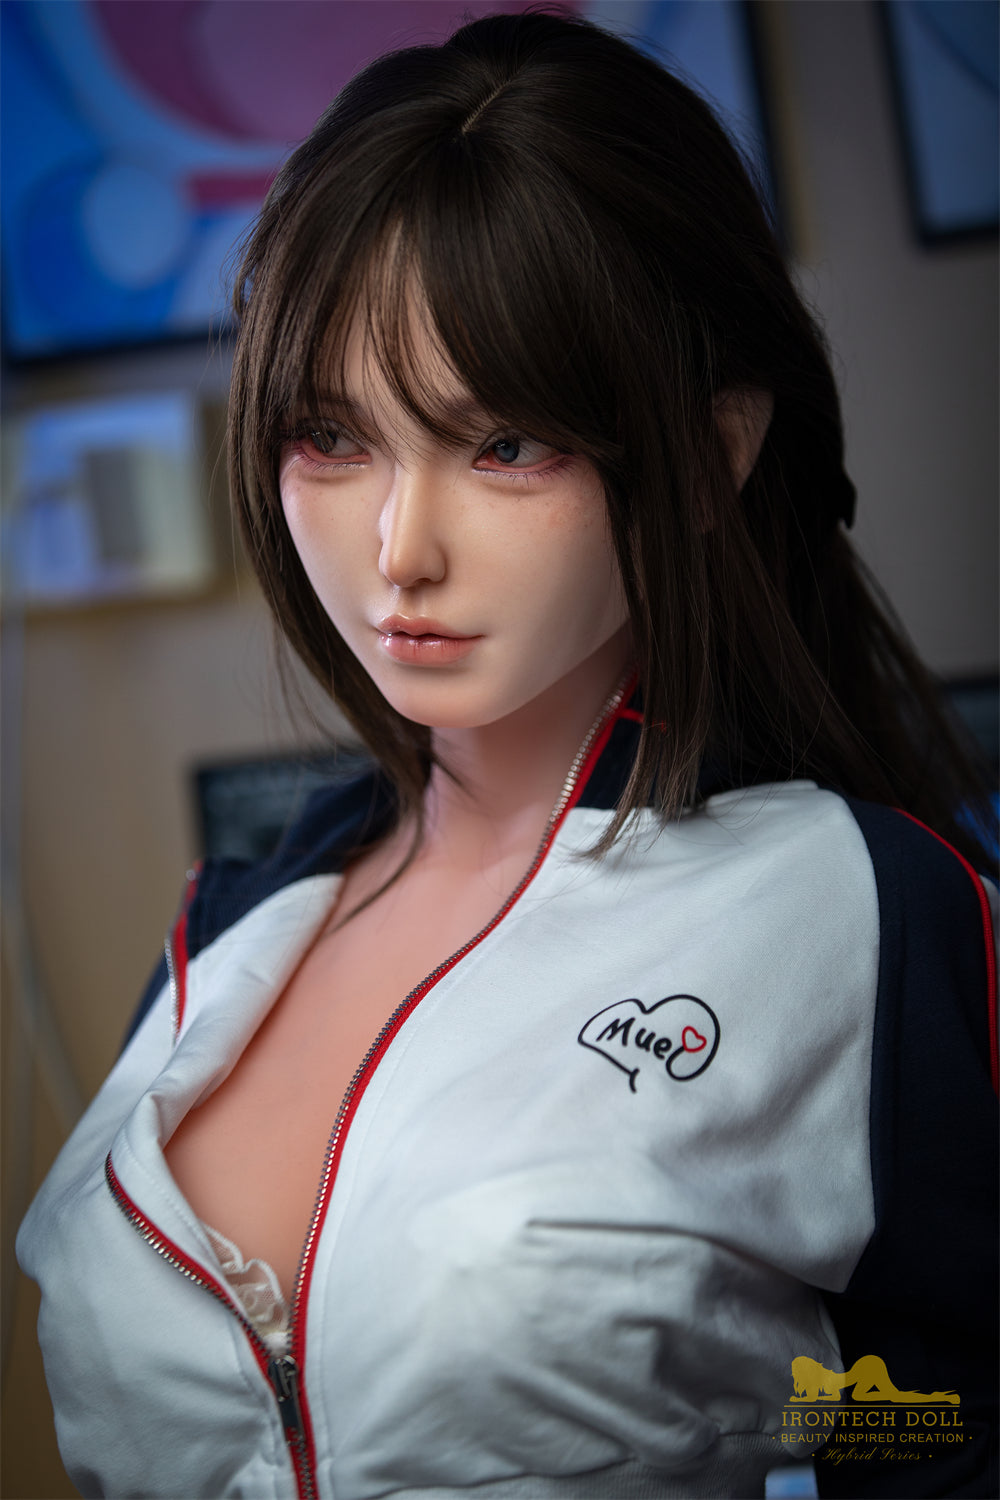 Irontech Doll 154 cm F Fusion - Yu | Buy Sex Dolls at DOLLS ACTUALLY